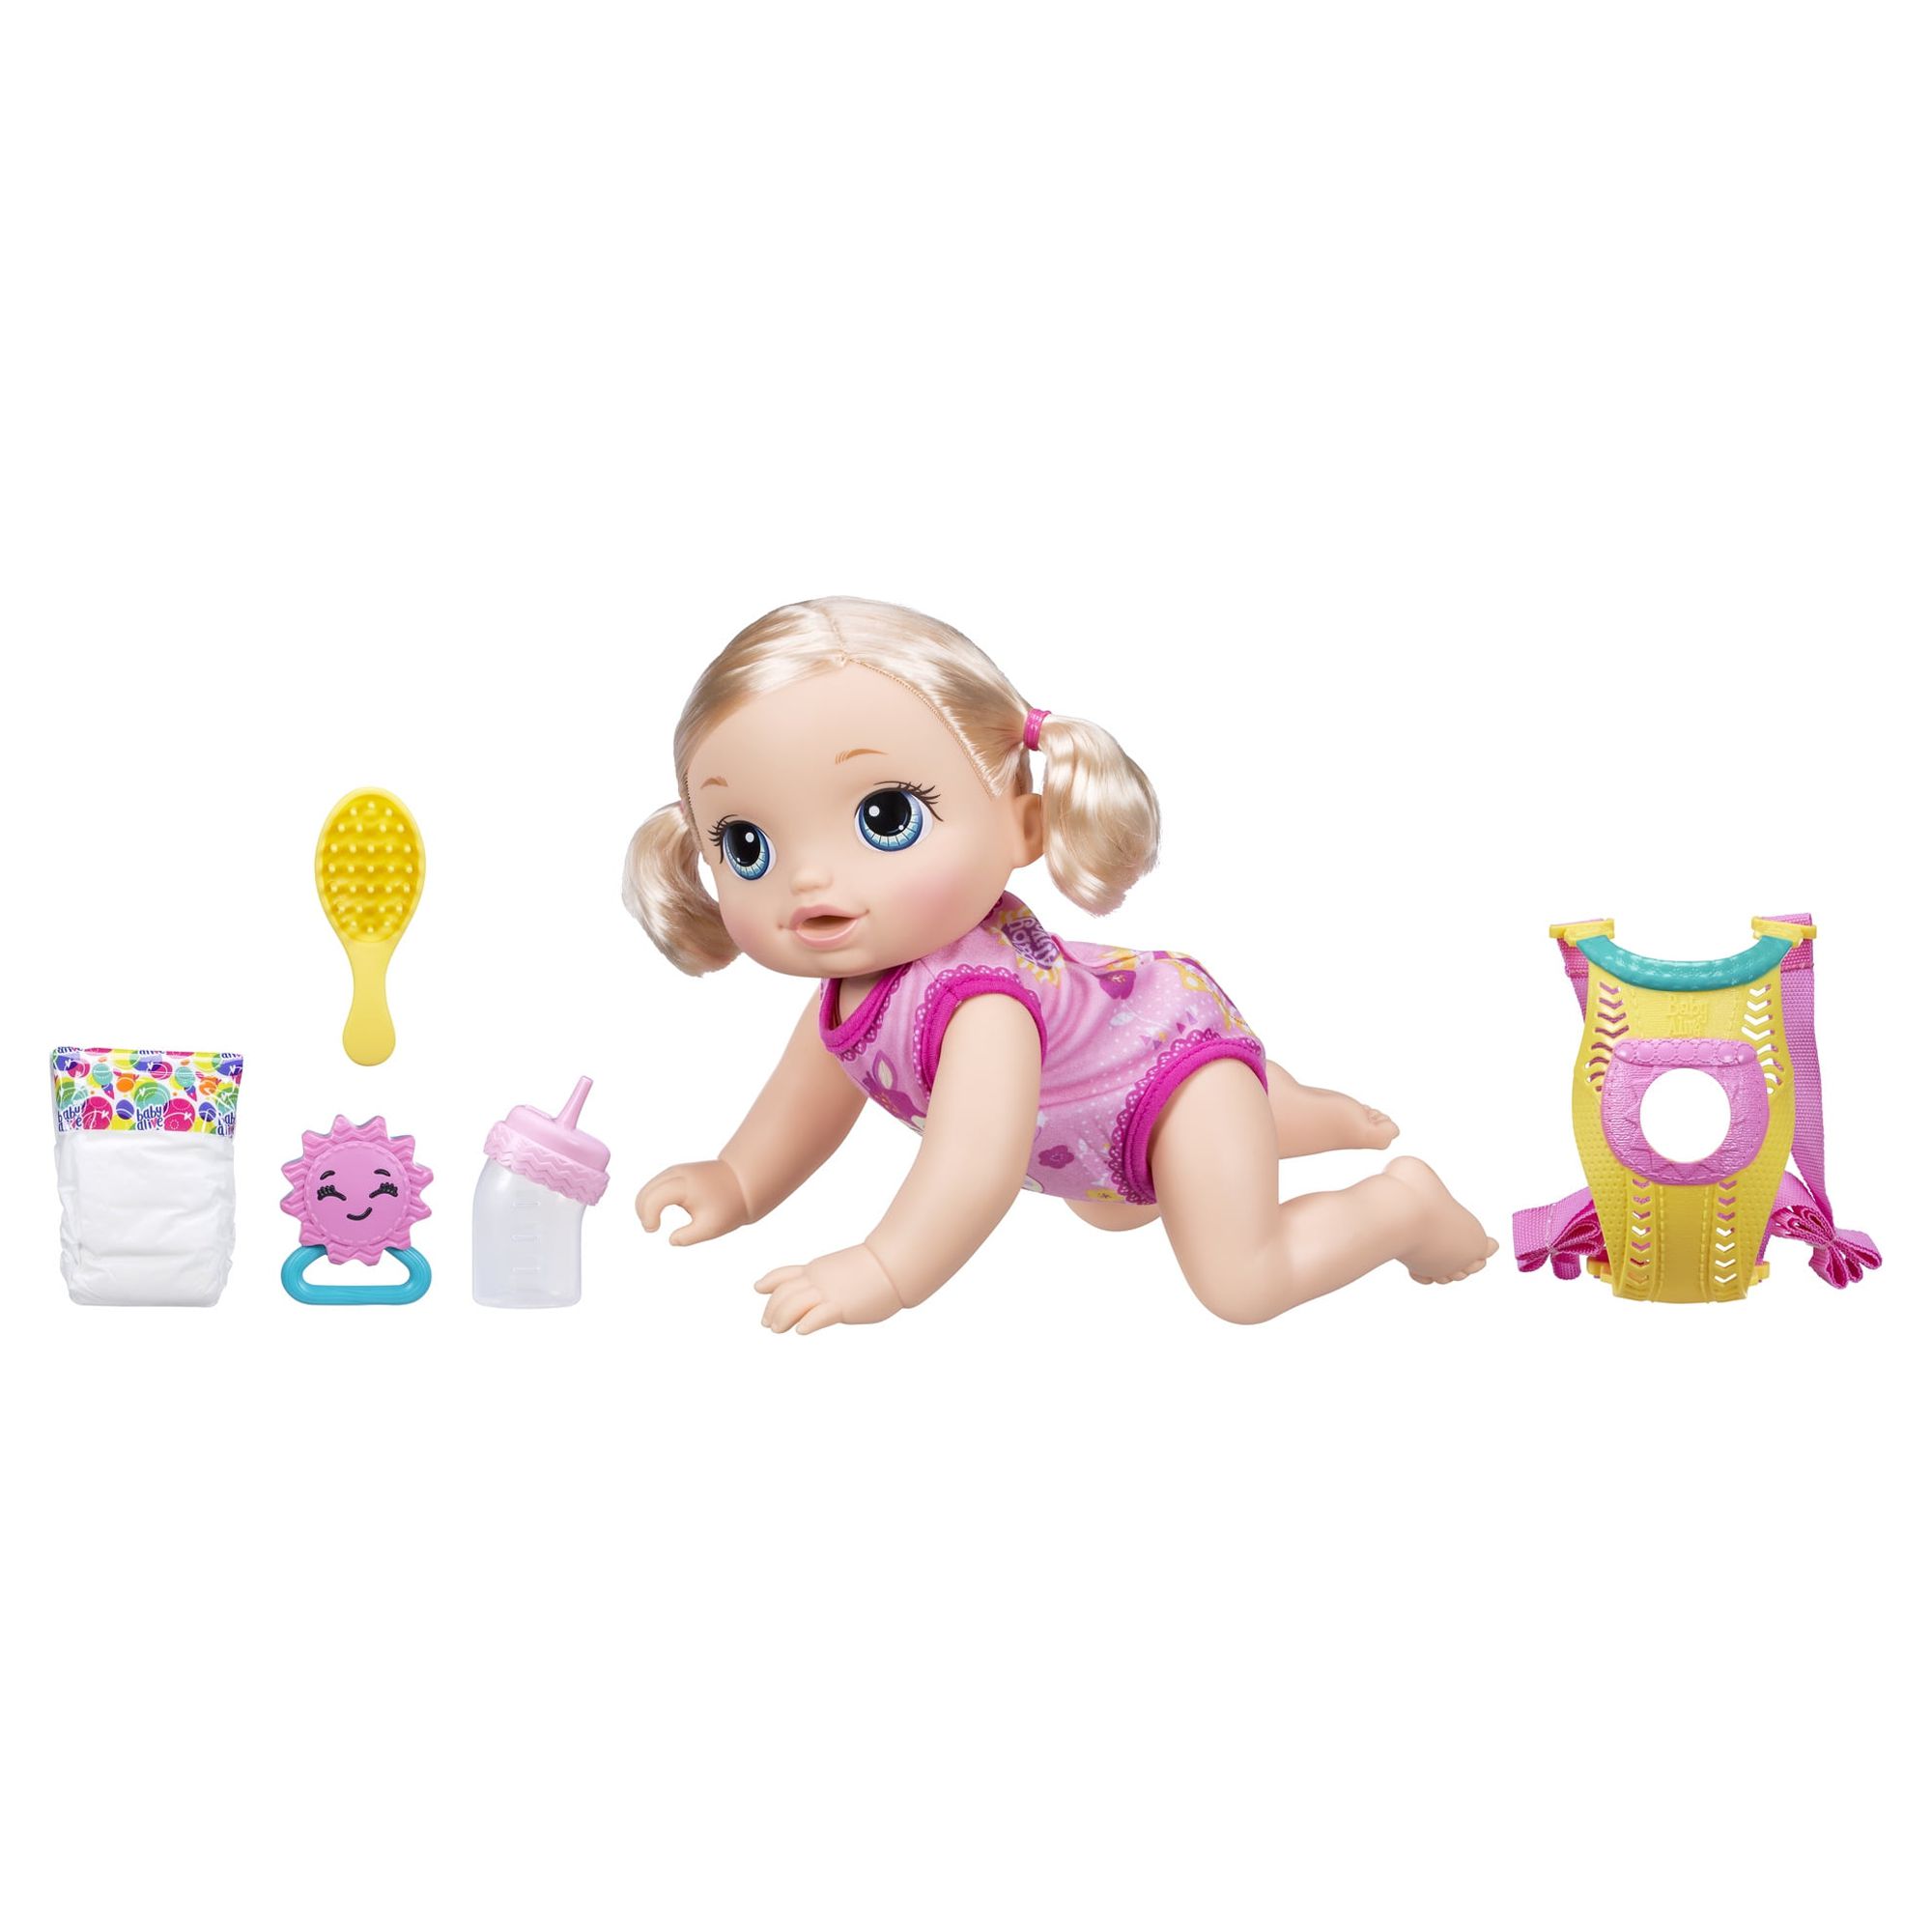 Baby Alive Baby Go Bye Bye Blonde Hair Doll, Includes Baby Doll Carrier, Only At Walmart - image 1 of 13